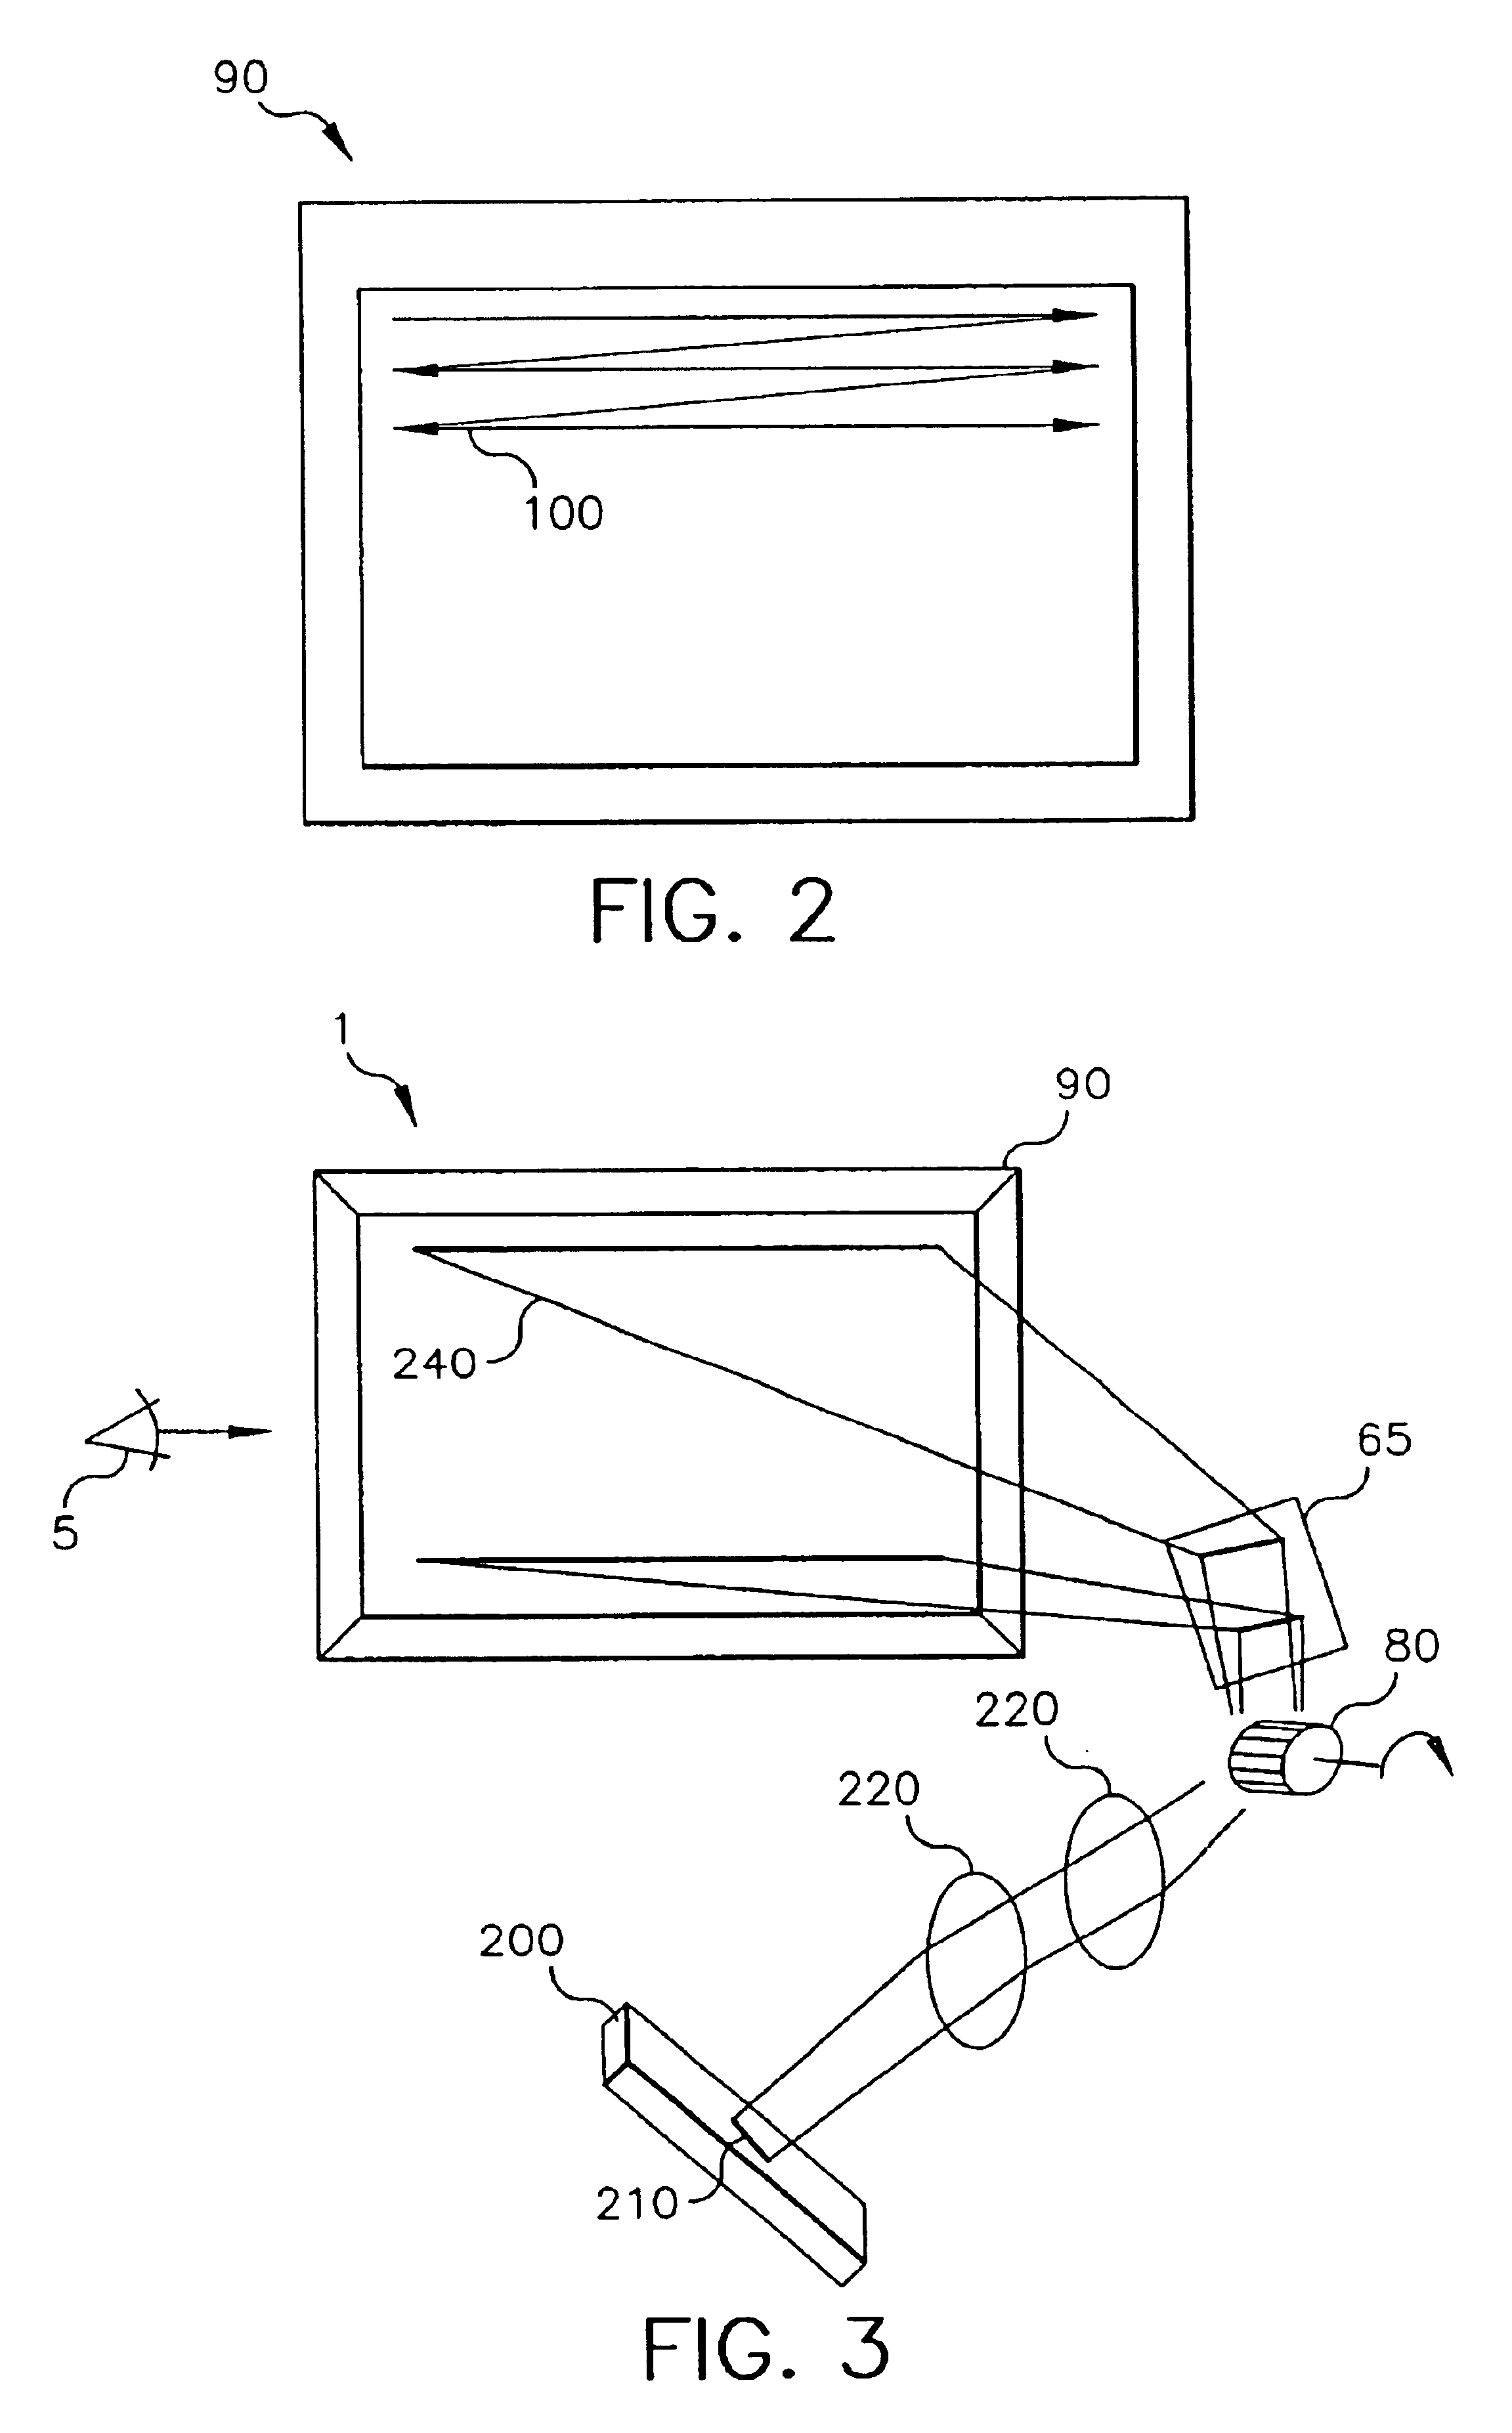 Display systems using organic laser light sources